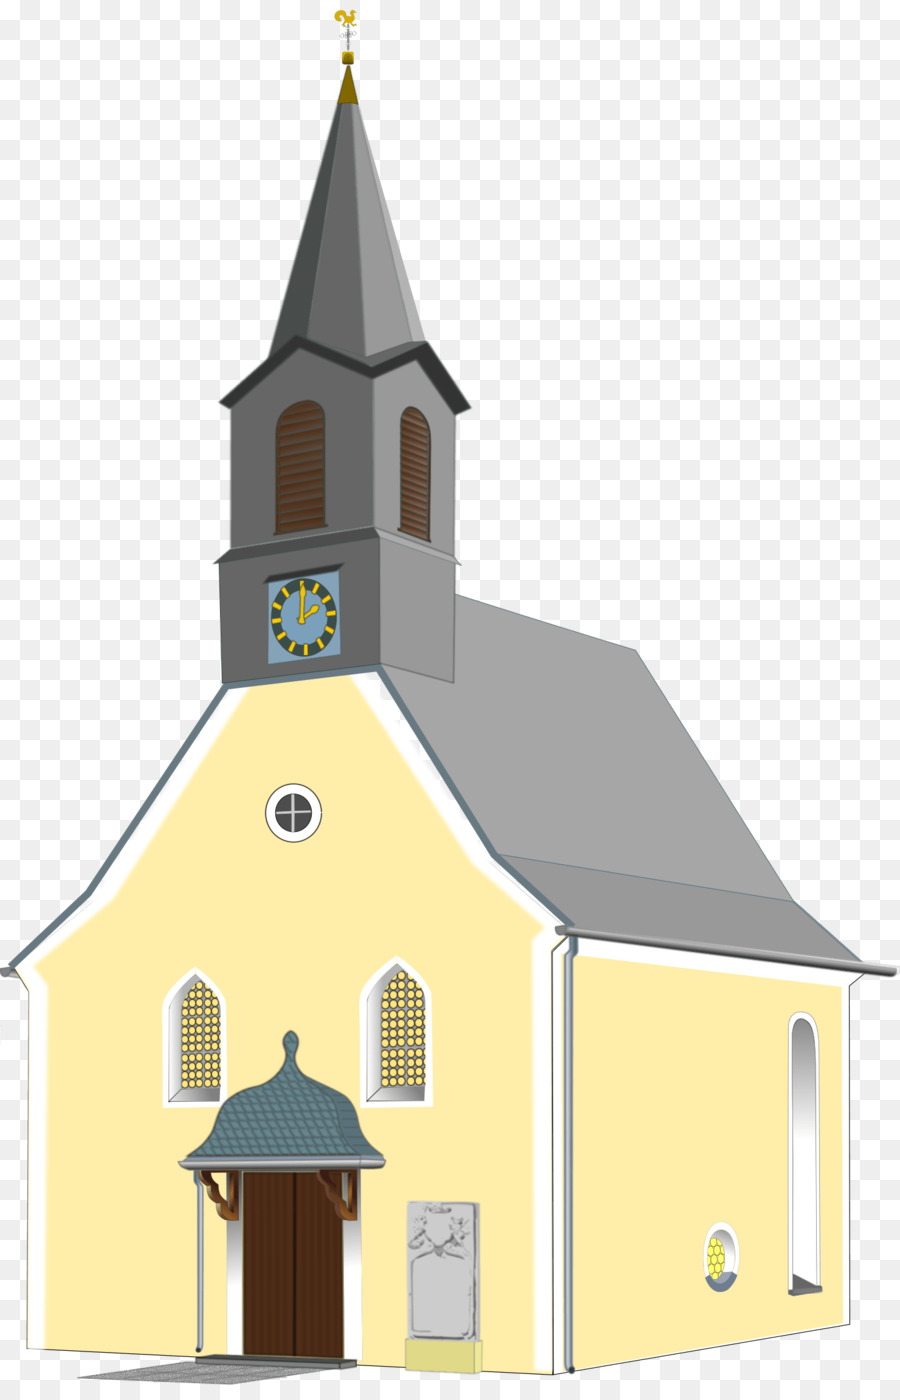 Clip art Portable Network Graphics Christian Church Image - church clipart png download - 1481*2289 - Free Transparent Church png Download.